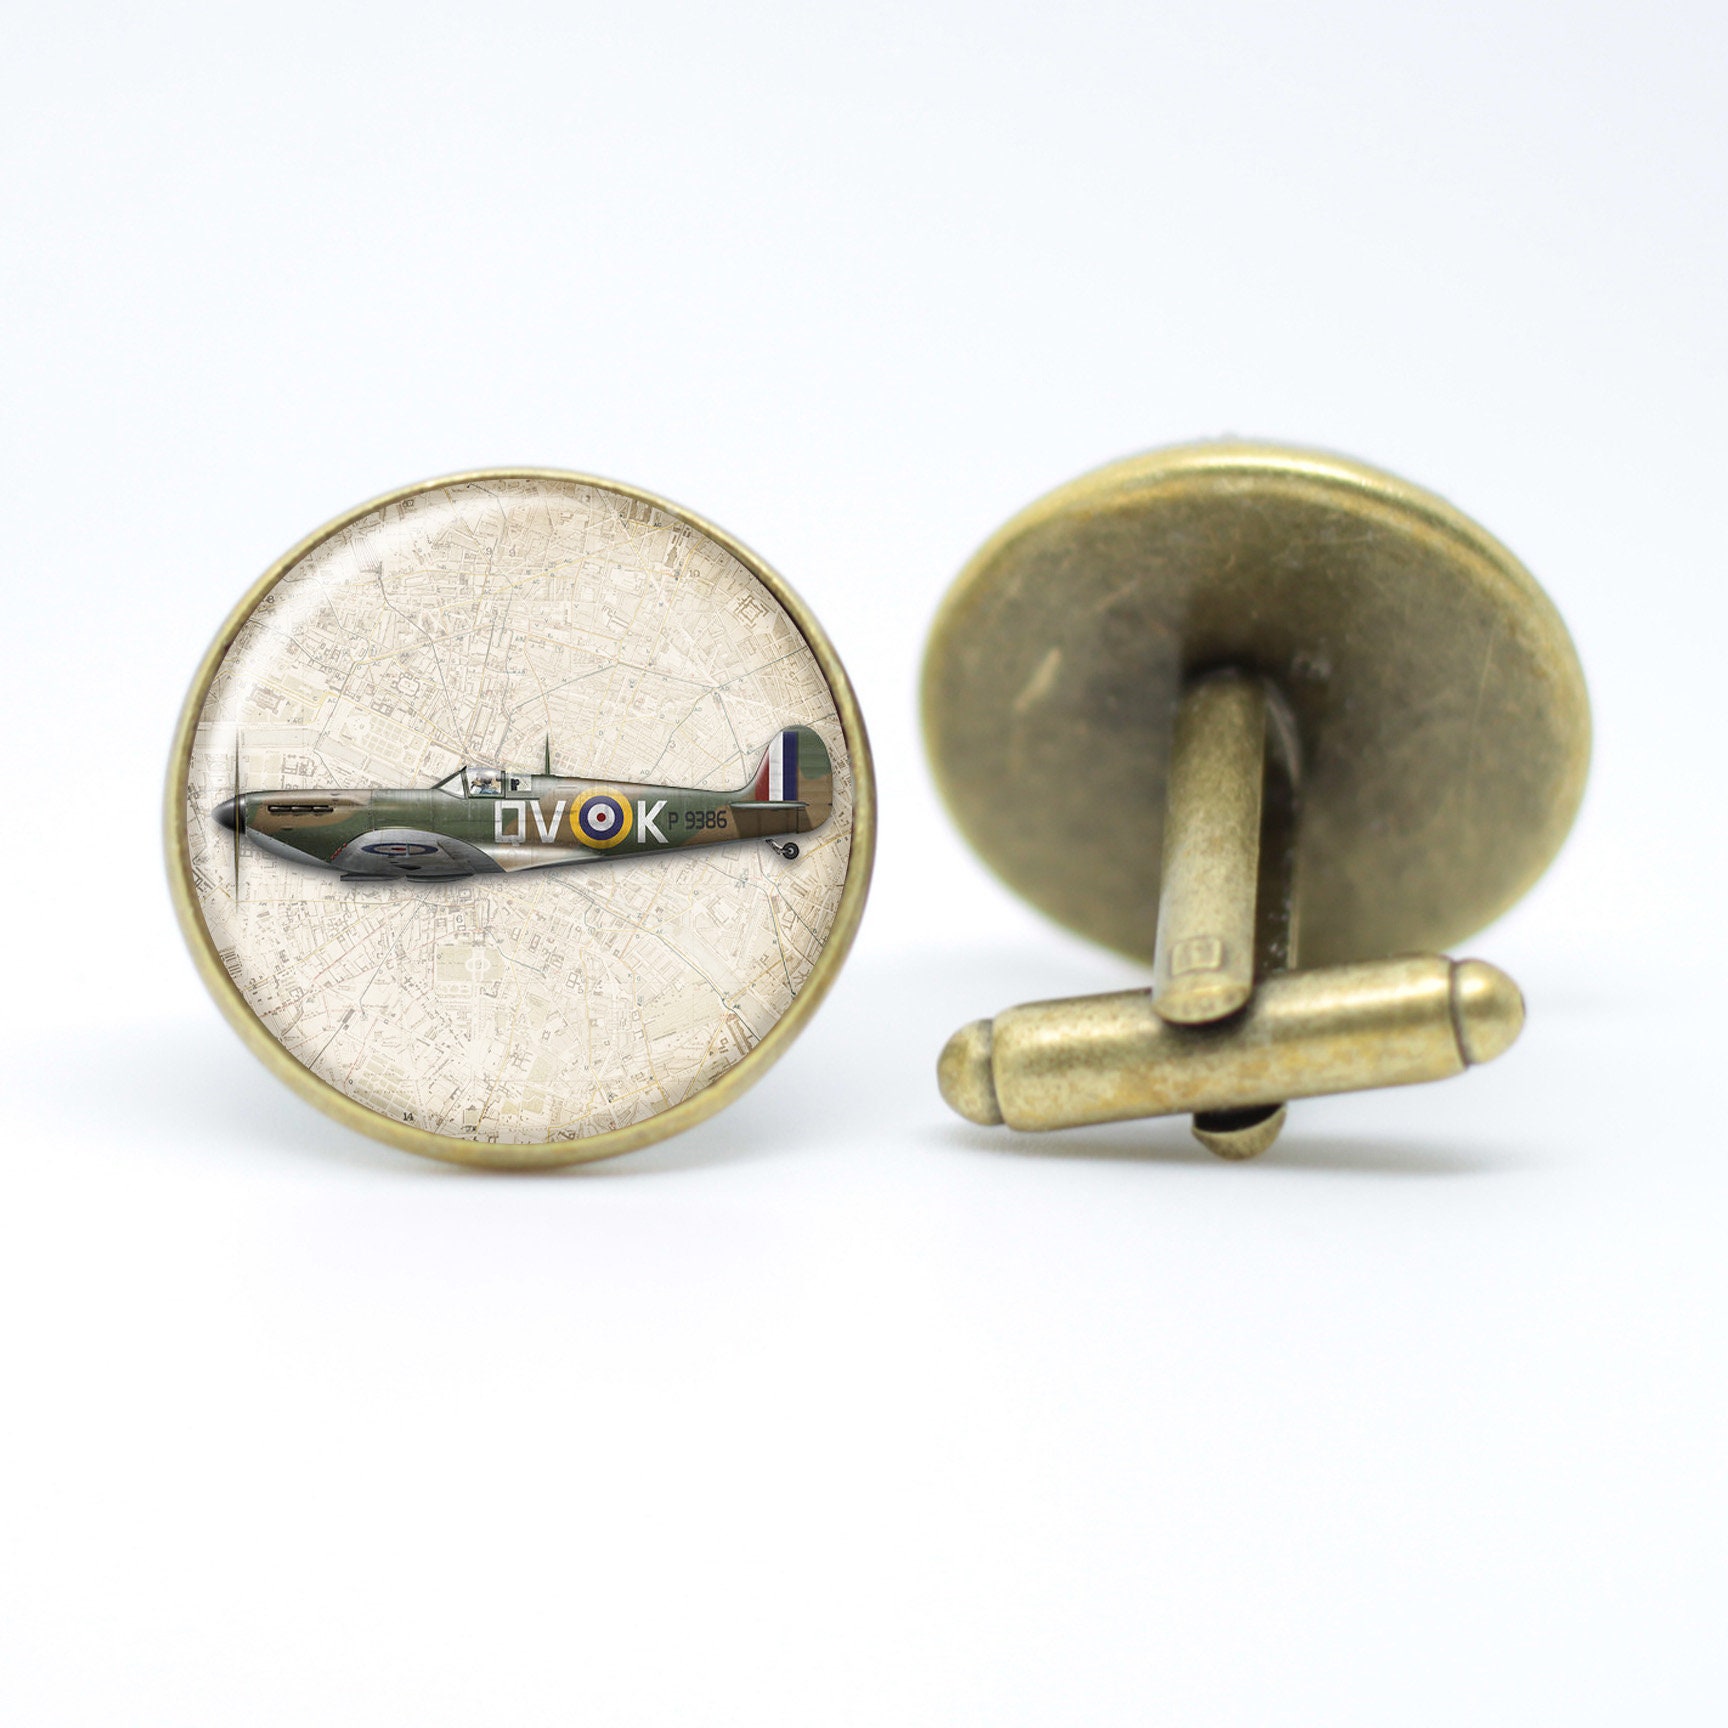 Spitfire Tie Pin for Men, Made with Original Spitfire Fuselage